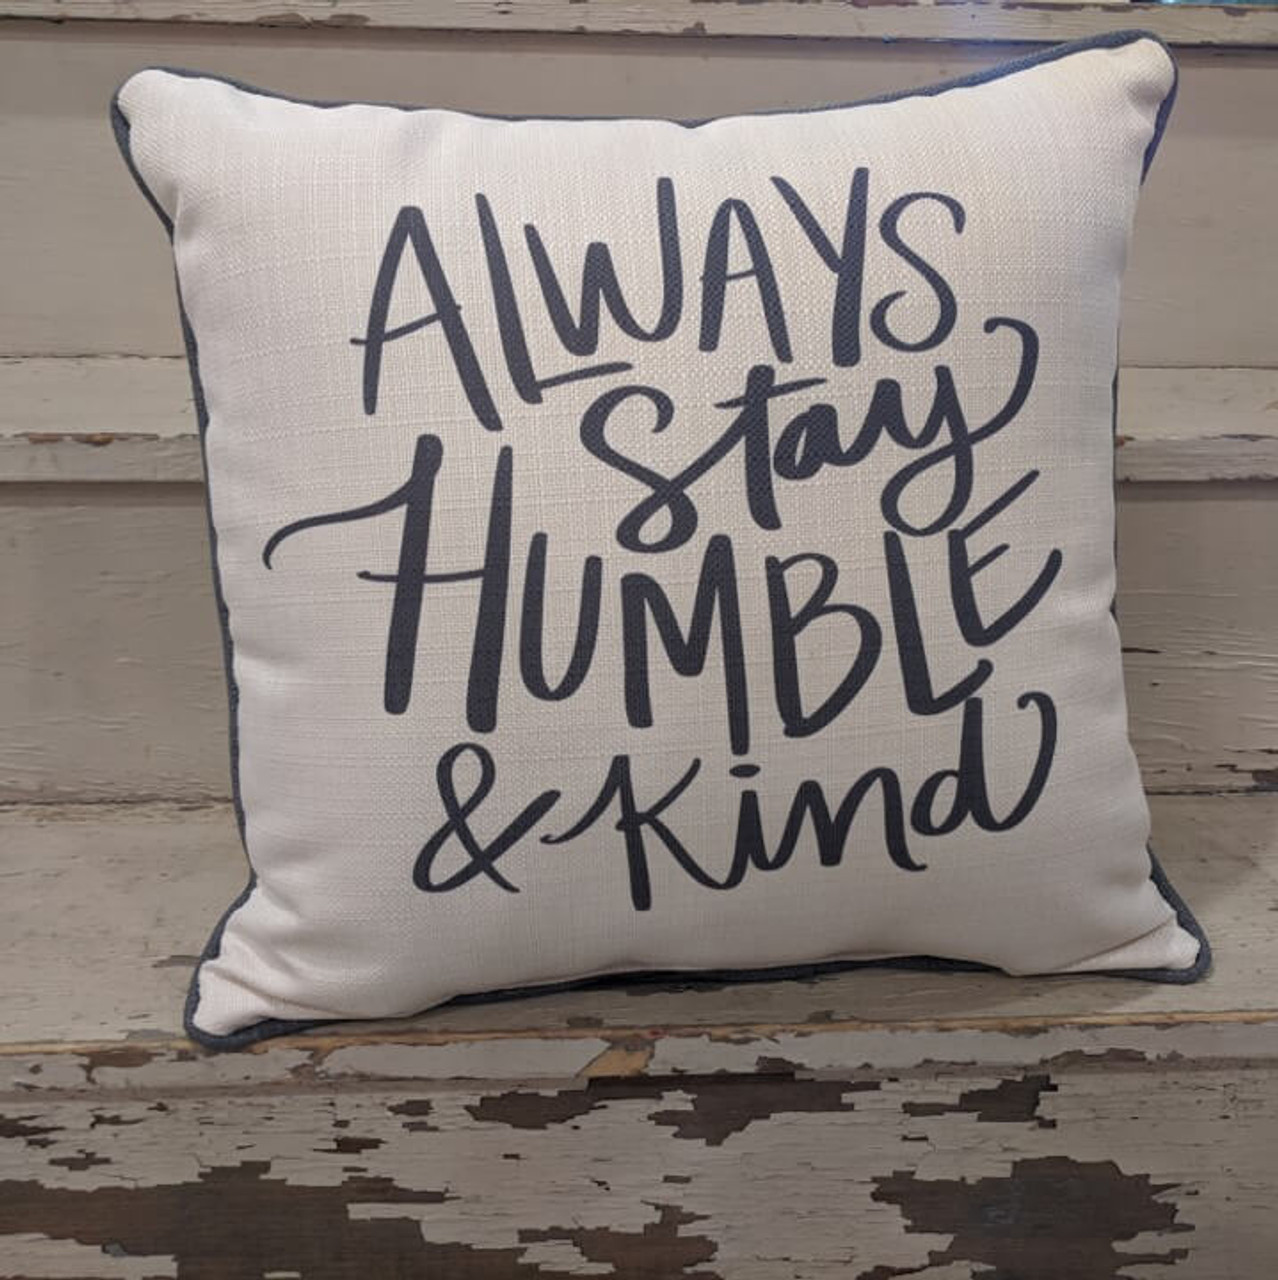 The perfect way to cozy up any space! "ALWLAYS Stay HUMBLE & Kind" sentiment is dyed directly into the fabric, so it won't peel or crack; grey piping around the edge for an extra pop! Made from a soft yet durable polyester fabric, your pillow will arrive stuffed with poly-fill and sewn shut.  Approx. 17" square; machine washable in cold water, delicate cycle- fluff, air dry flat.